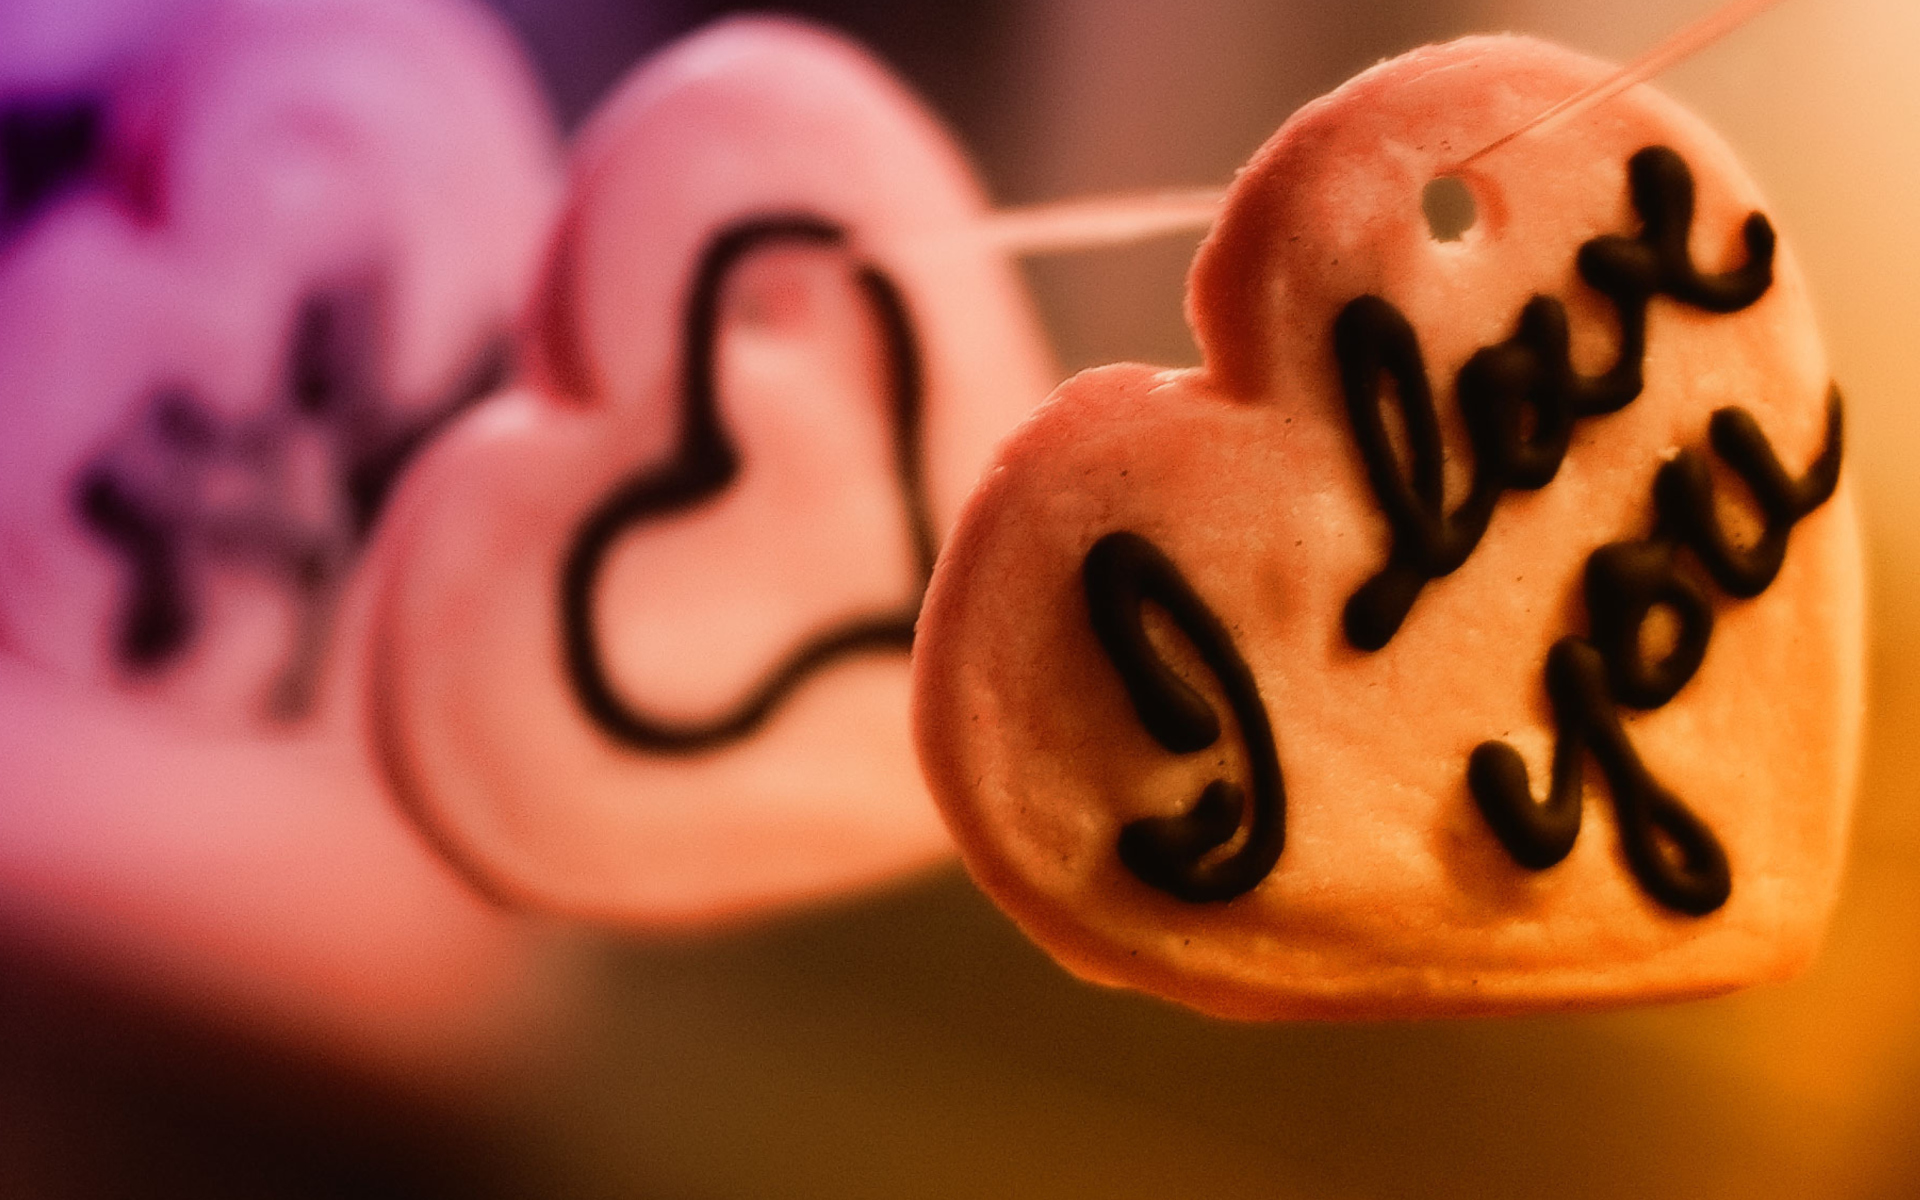 I Love You Cookie wallpaper 1920x1200